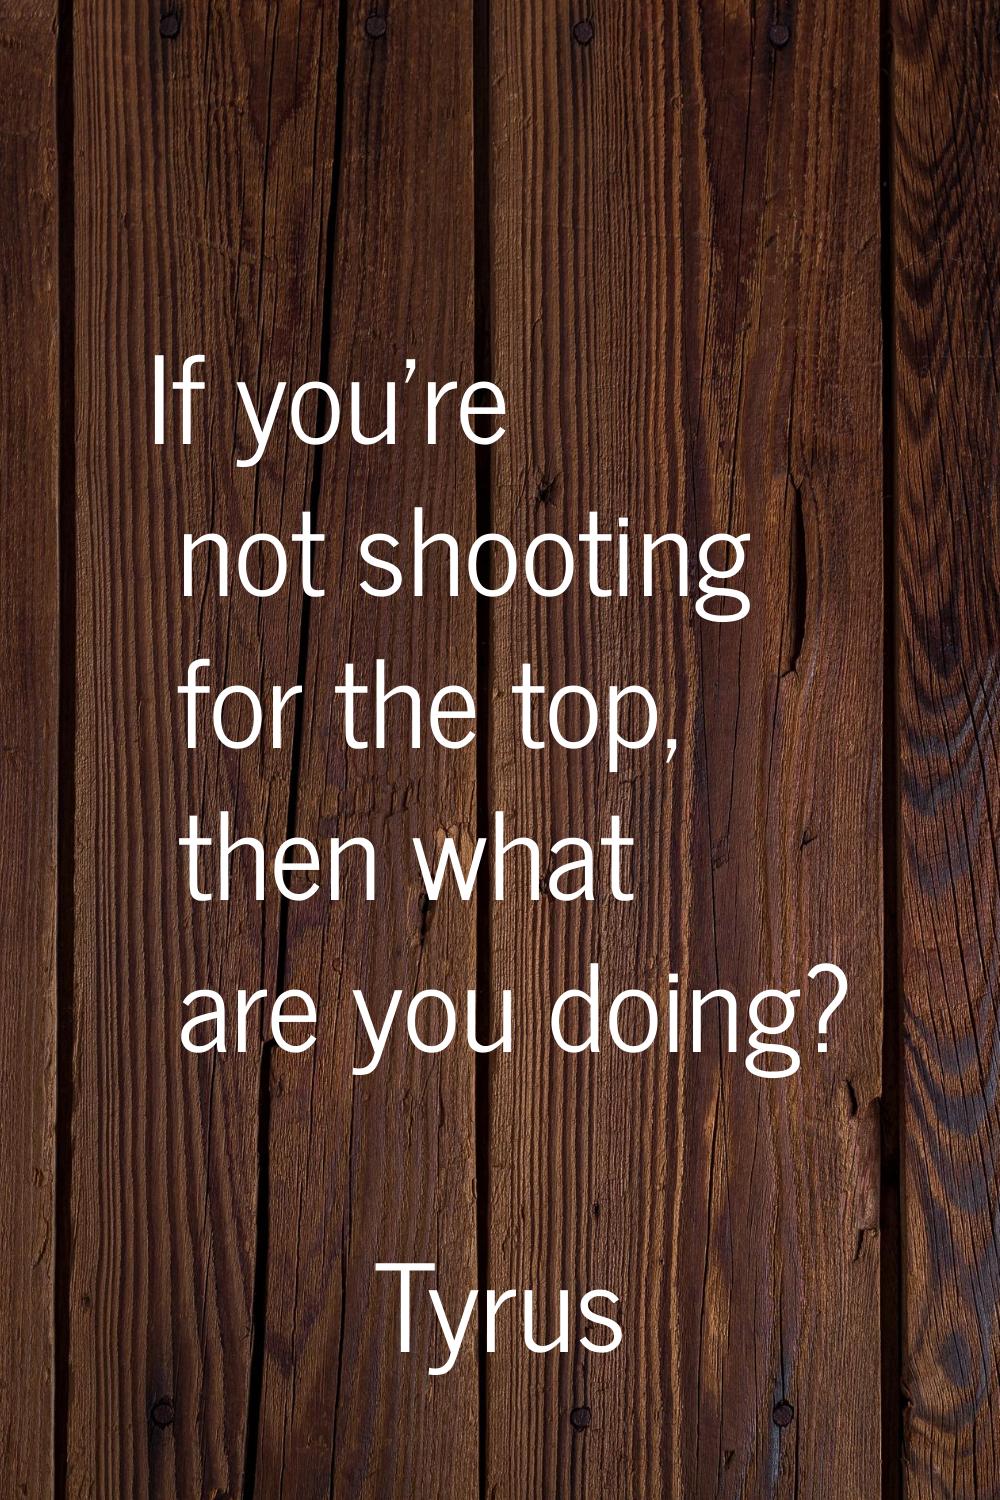 If you're not shooting for the top, then what are you doing?